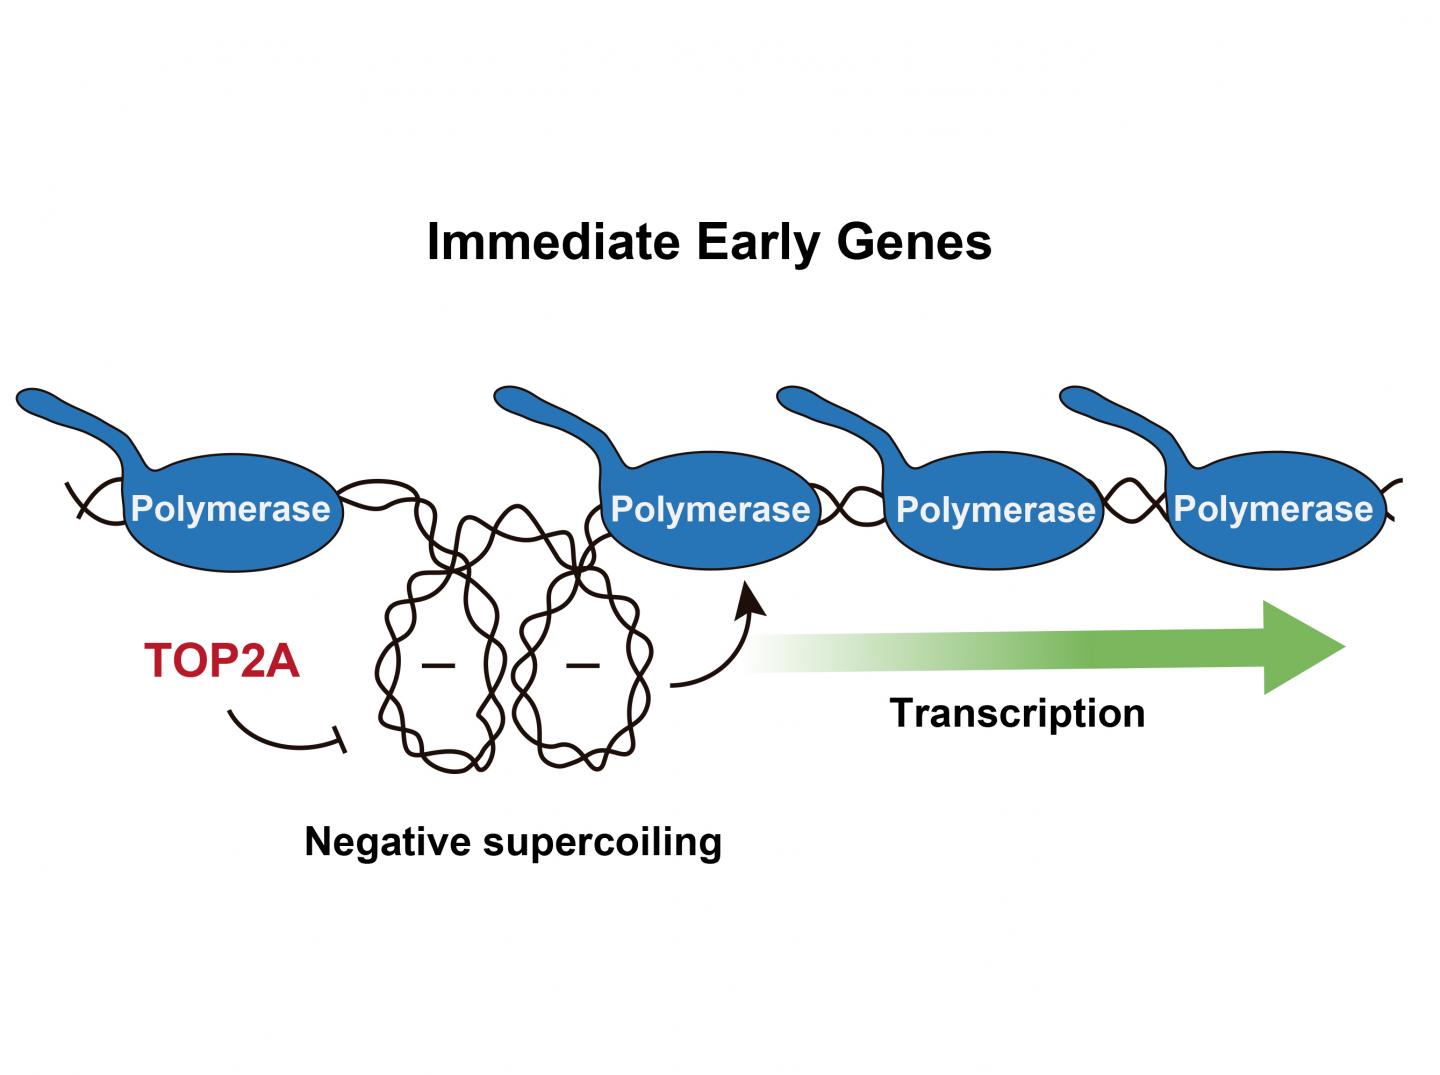 TOP2A Relieves Negative Supercoiling at Gene Promoters, Which Prevents the Advance RNA Polymerase